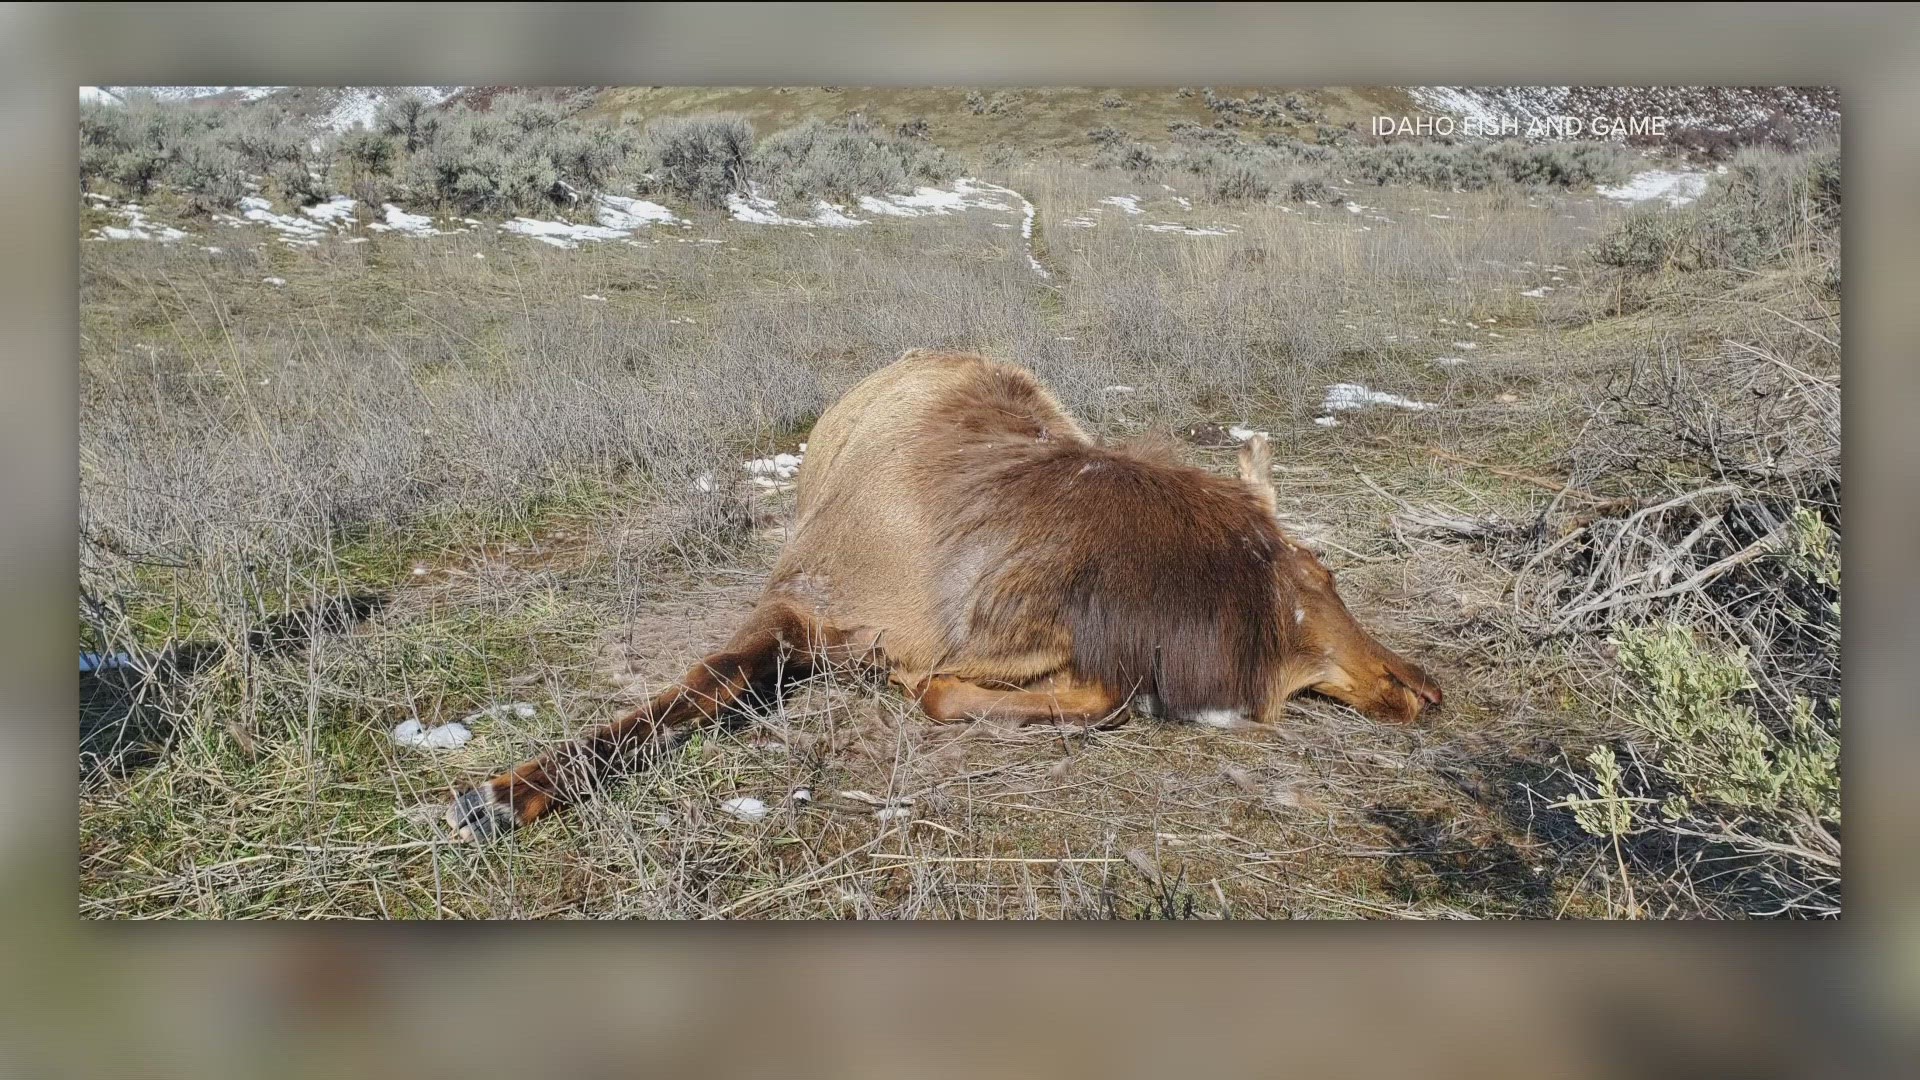 Idaho Fish and Game is asking the public for information after five elk were shot out of season and left to waste in two incidents in southwest Idaho.